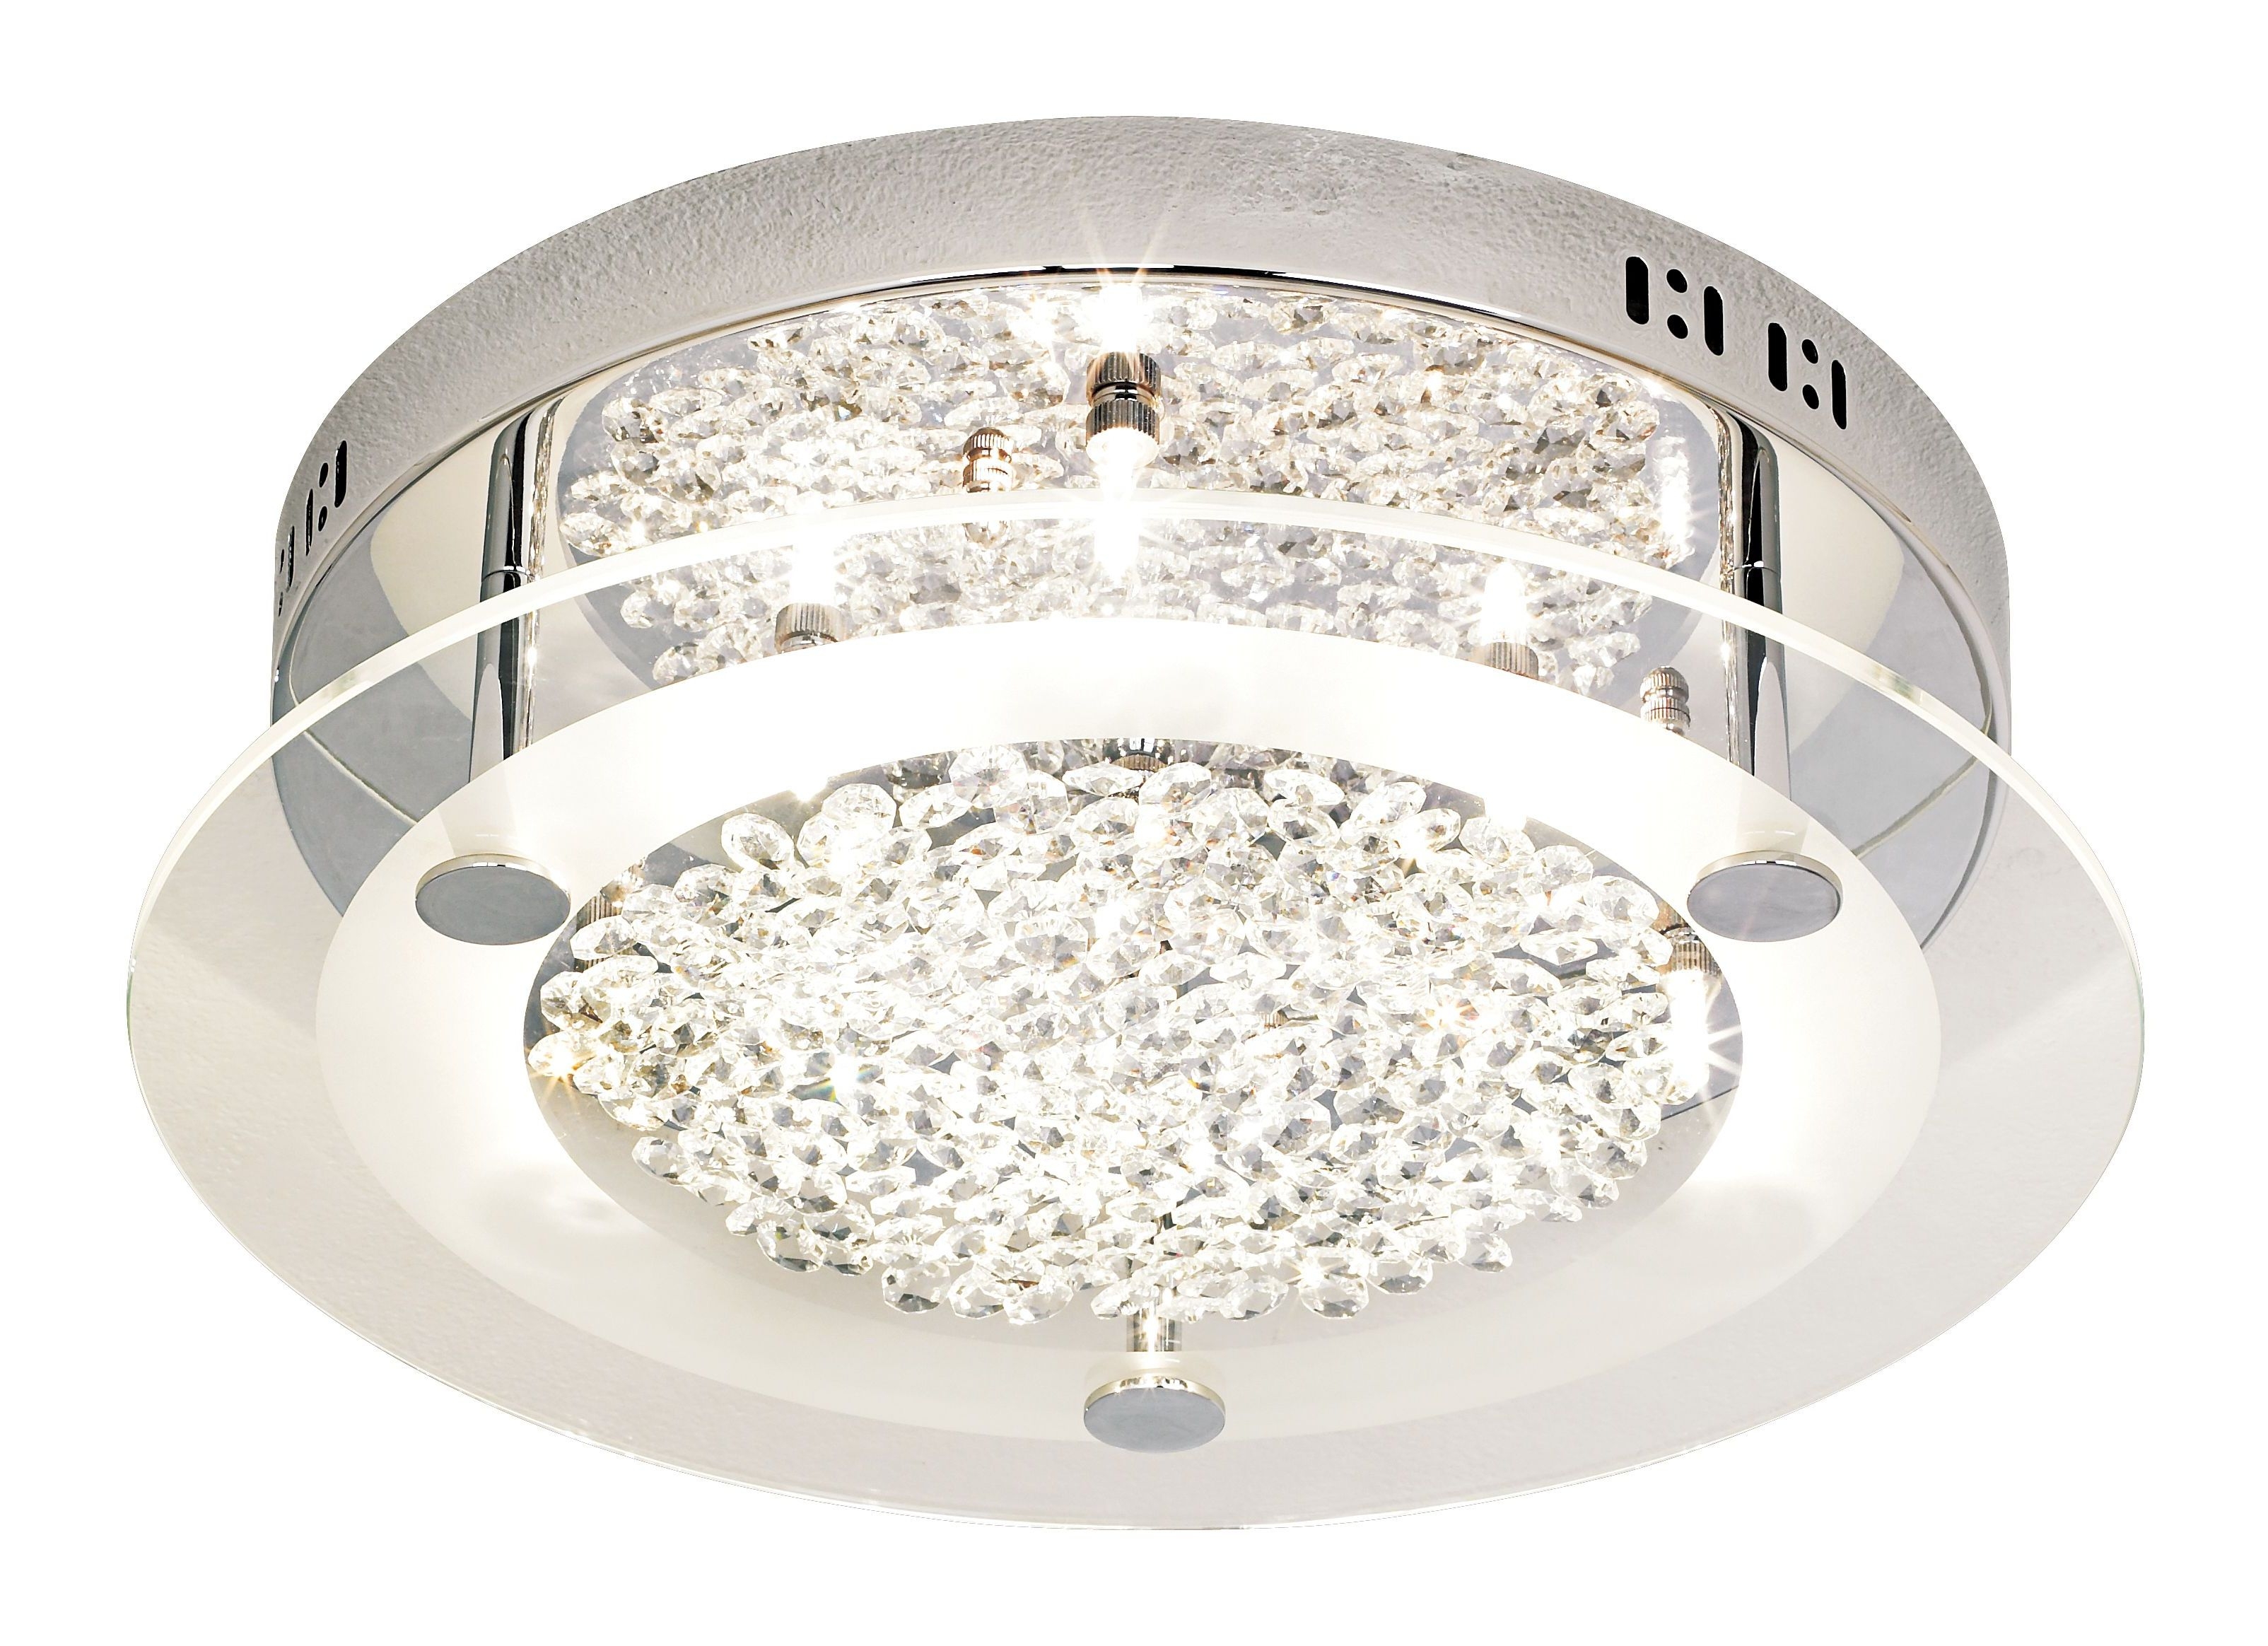 Decorative Ceiling Exhaust Fan With Light